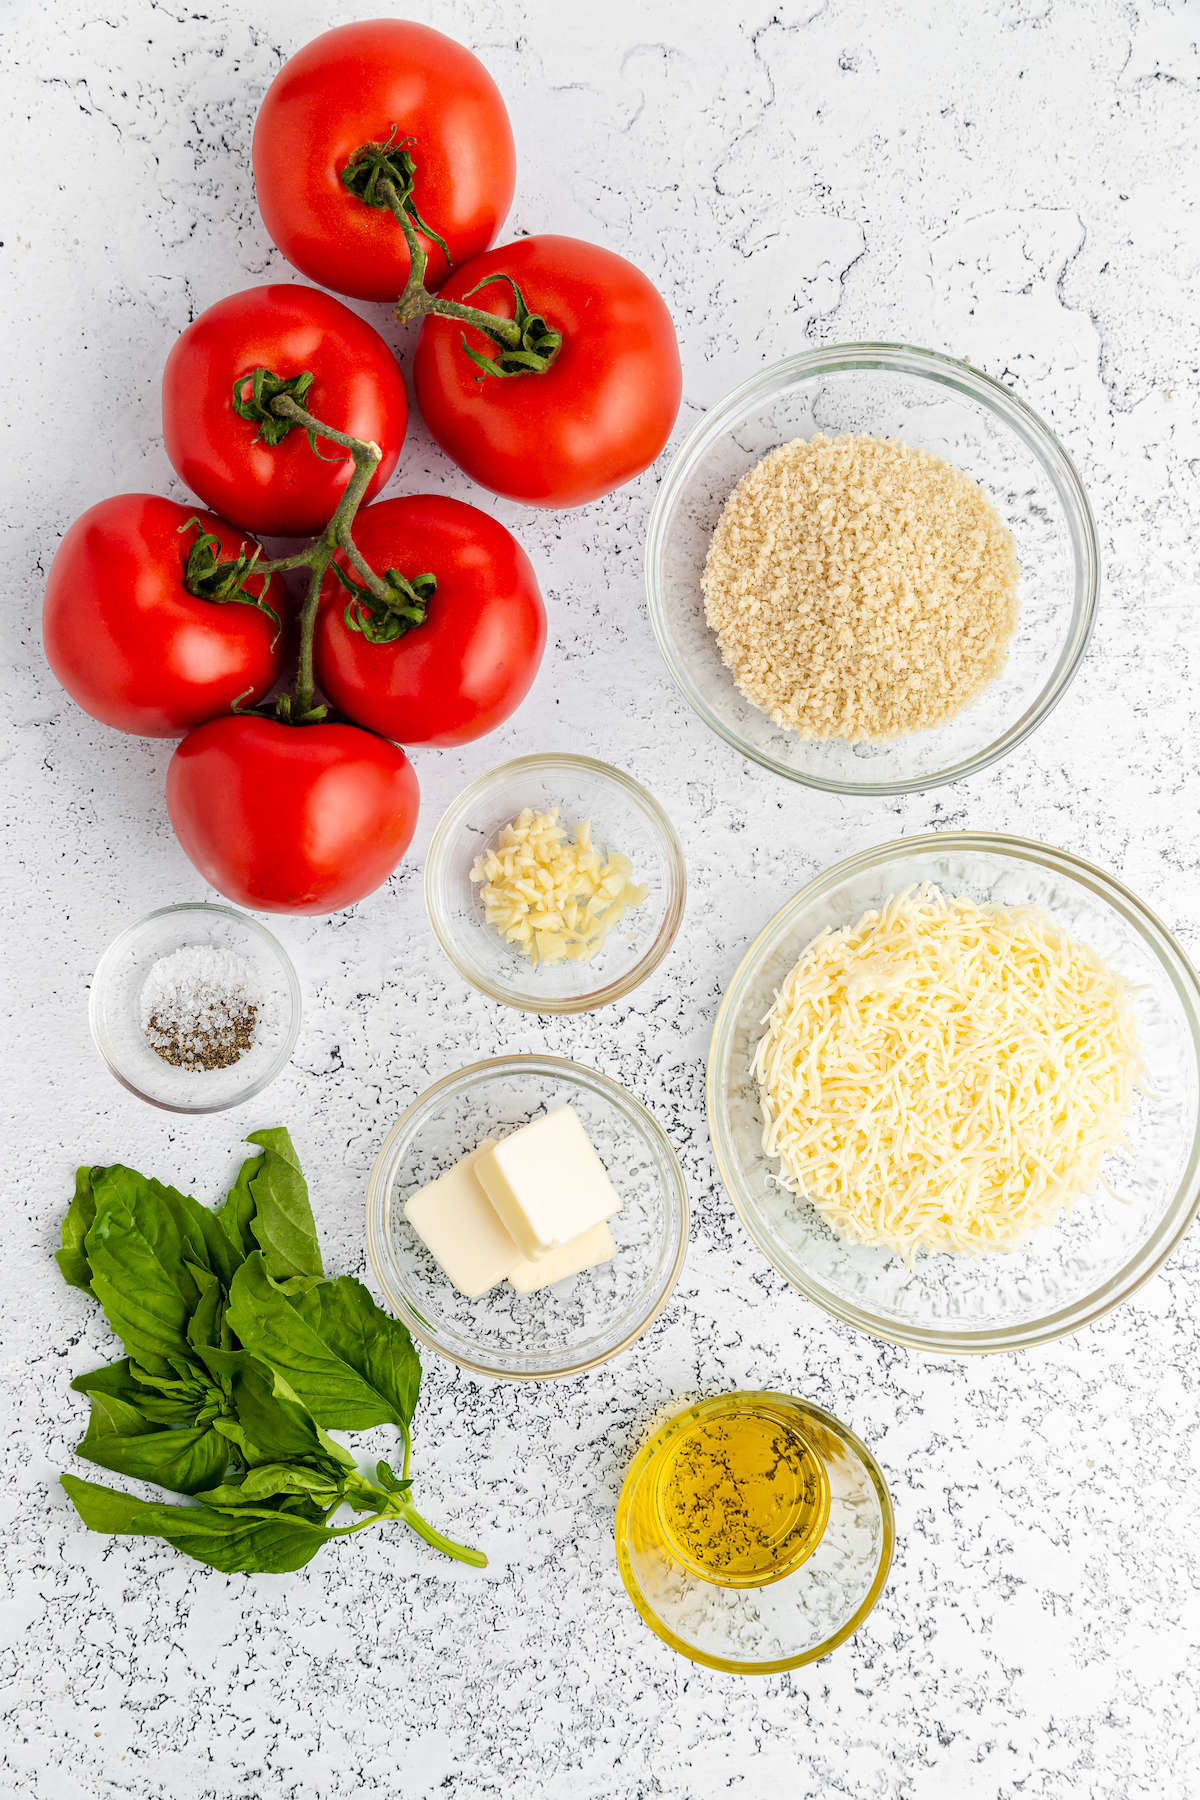 From top left: Vine-ripe tomatoes, bread crumbs, salt and pepper, garlic, cheese, fresh basil, butter, olive oil.